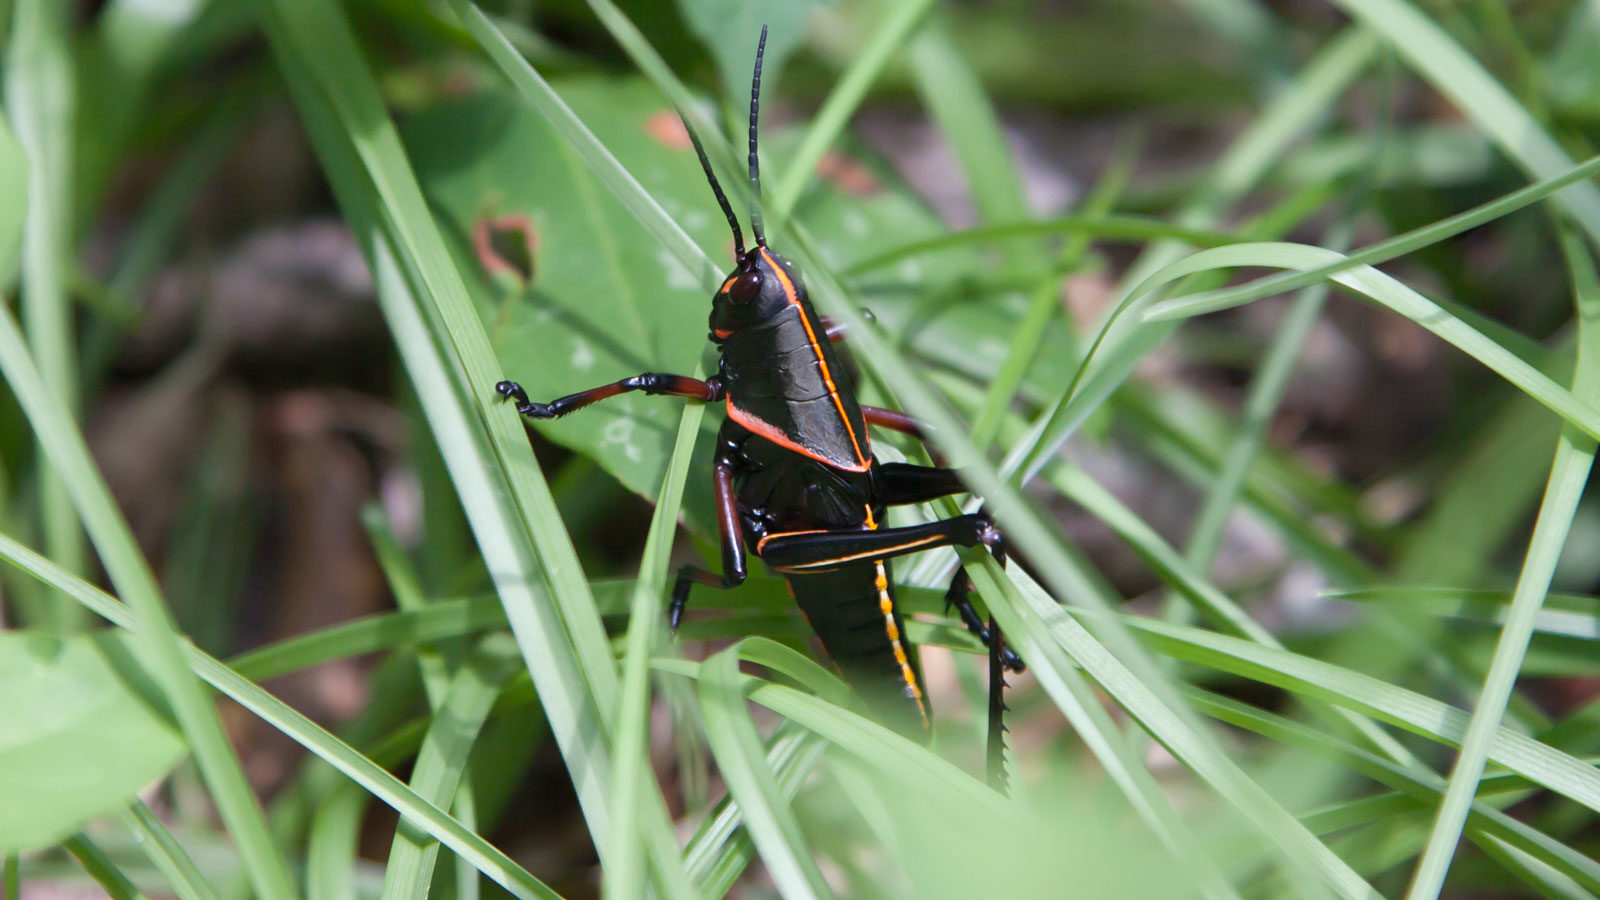 Eastern lubber grasshopper nymph in the grass